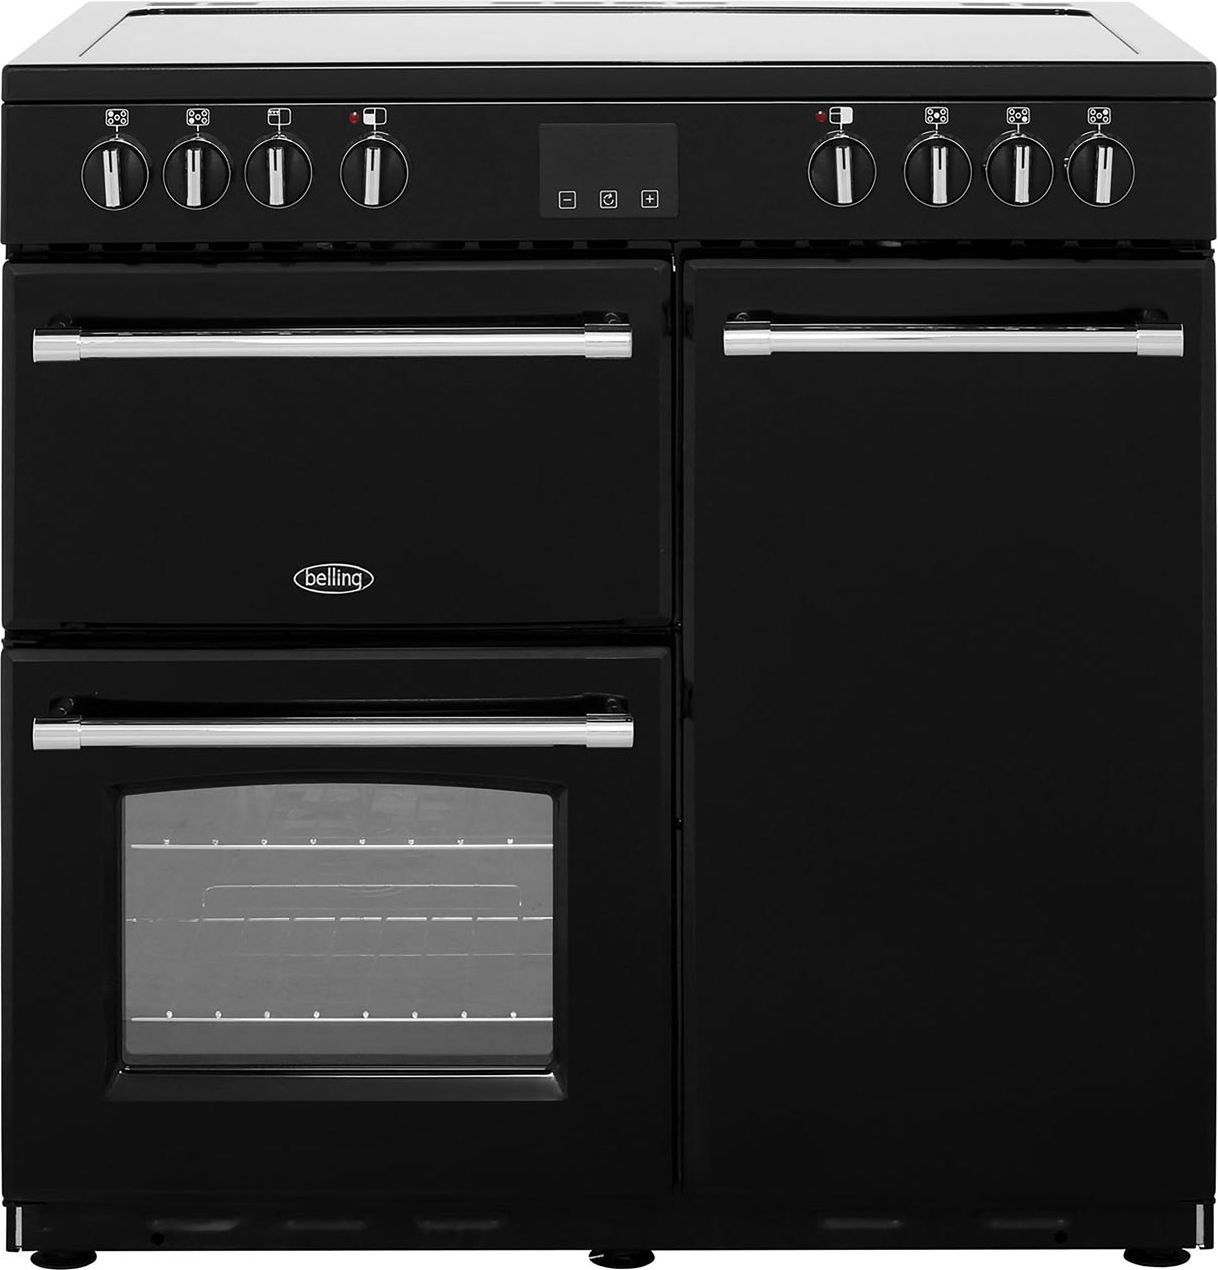 Belling Farmhouse90E 90cm Electric Range Cooker with Ceramic Hob - Black - A/A Rated, Black